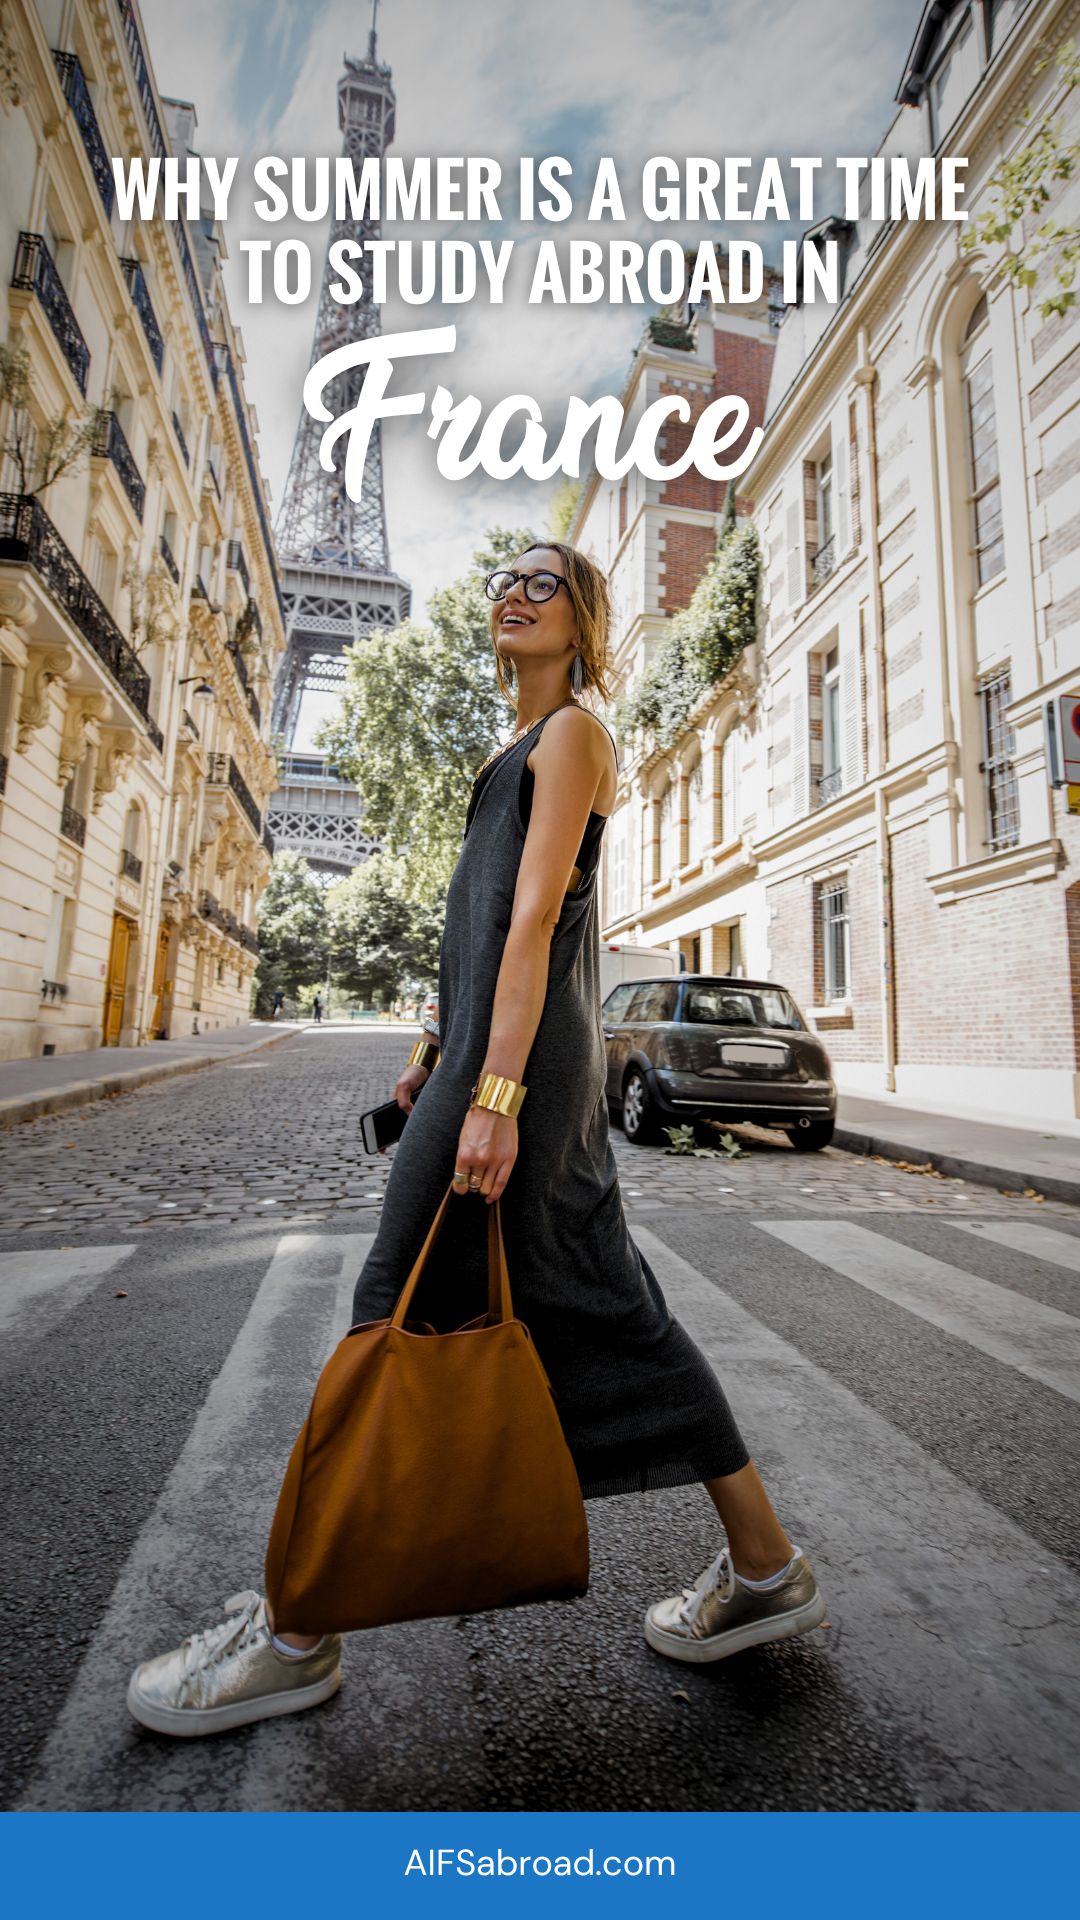 Pin image: Young woman walking in Paris, France with Eiffel Tower in background. Text overlay saying, "why summer is a great time to study abroad in France"